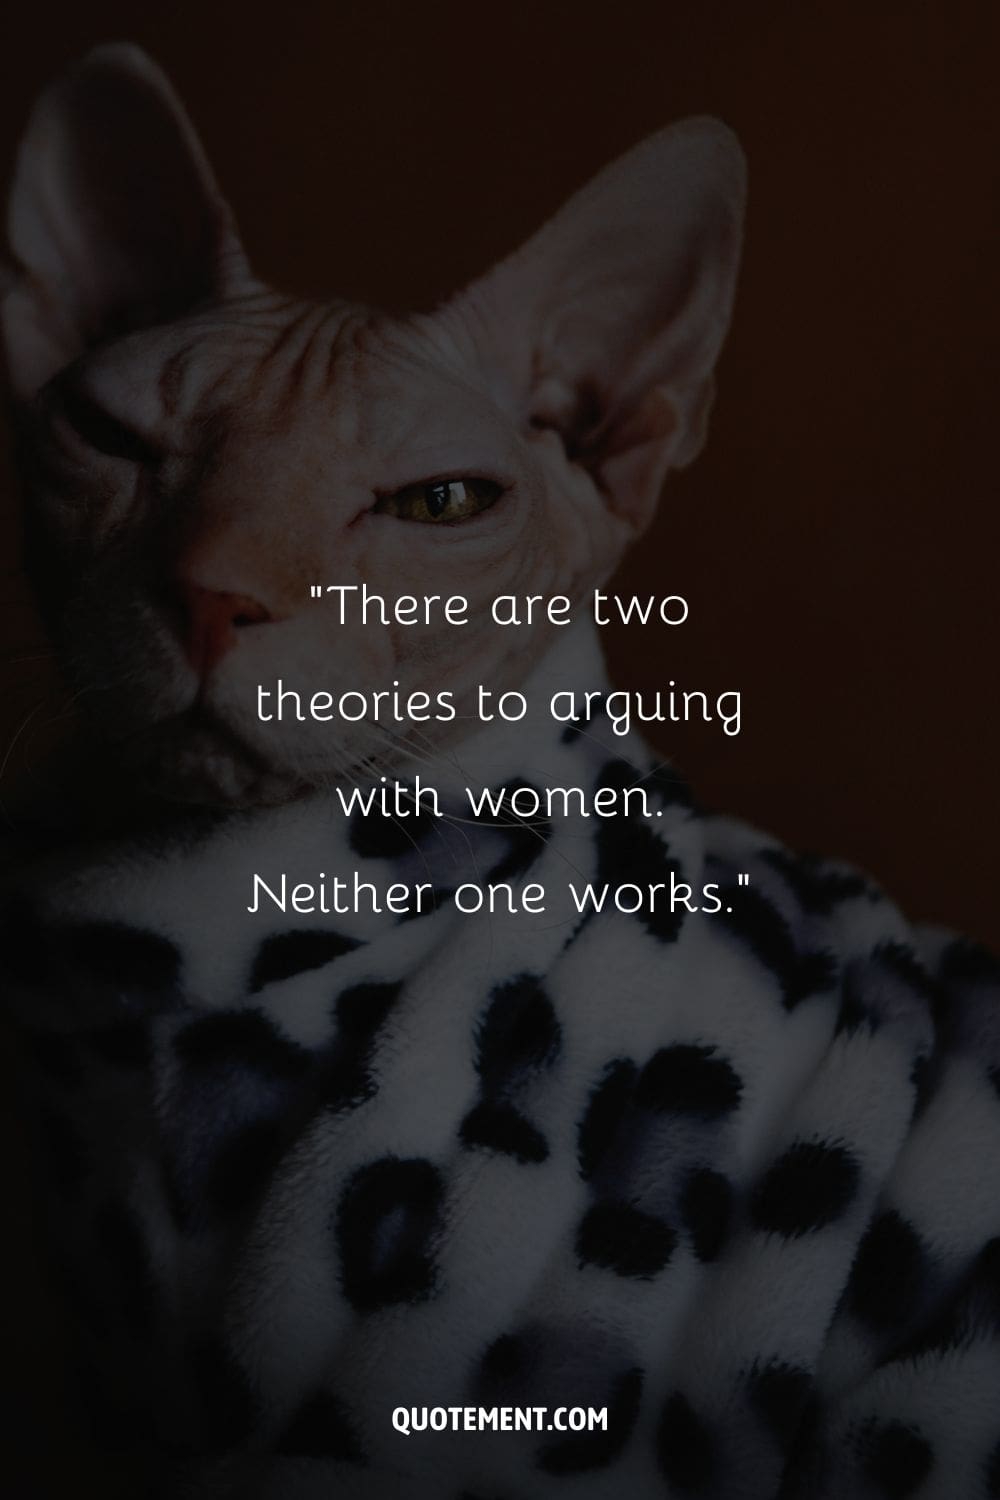 “There are two theories to arguing with women. Neither one works.” ― Unknown